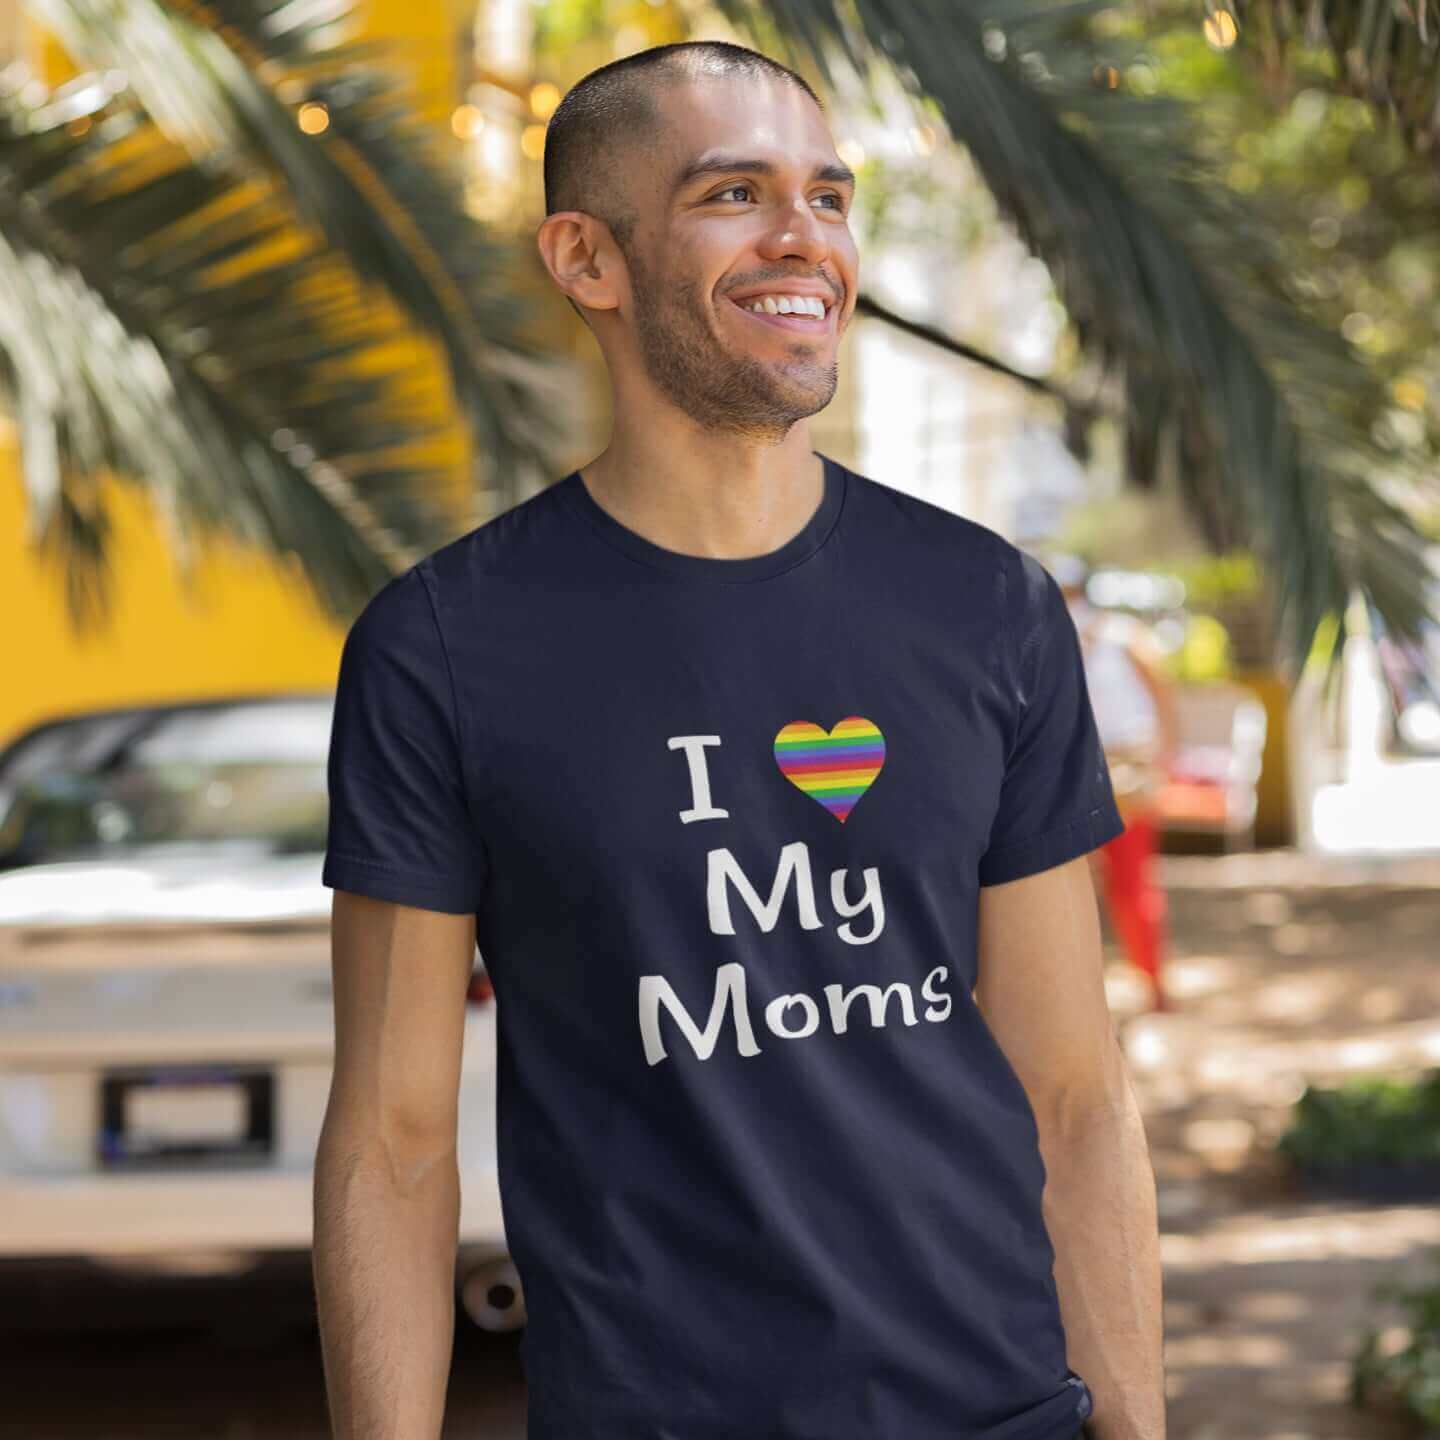 Man wearing navy blue t-shirt with I heart my moms printed on the front. The heart is rainbow colors.